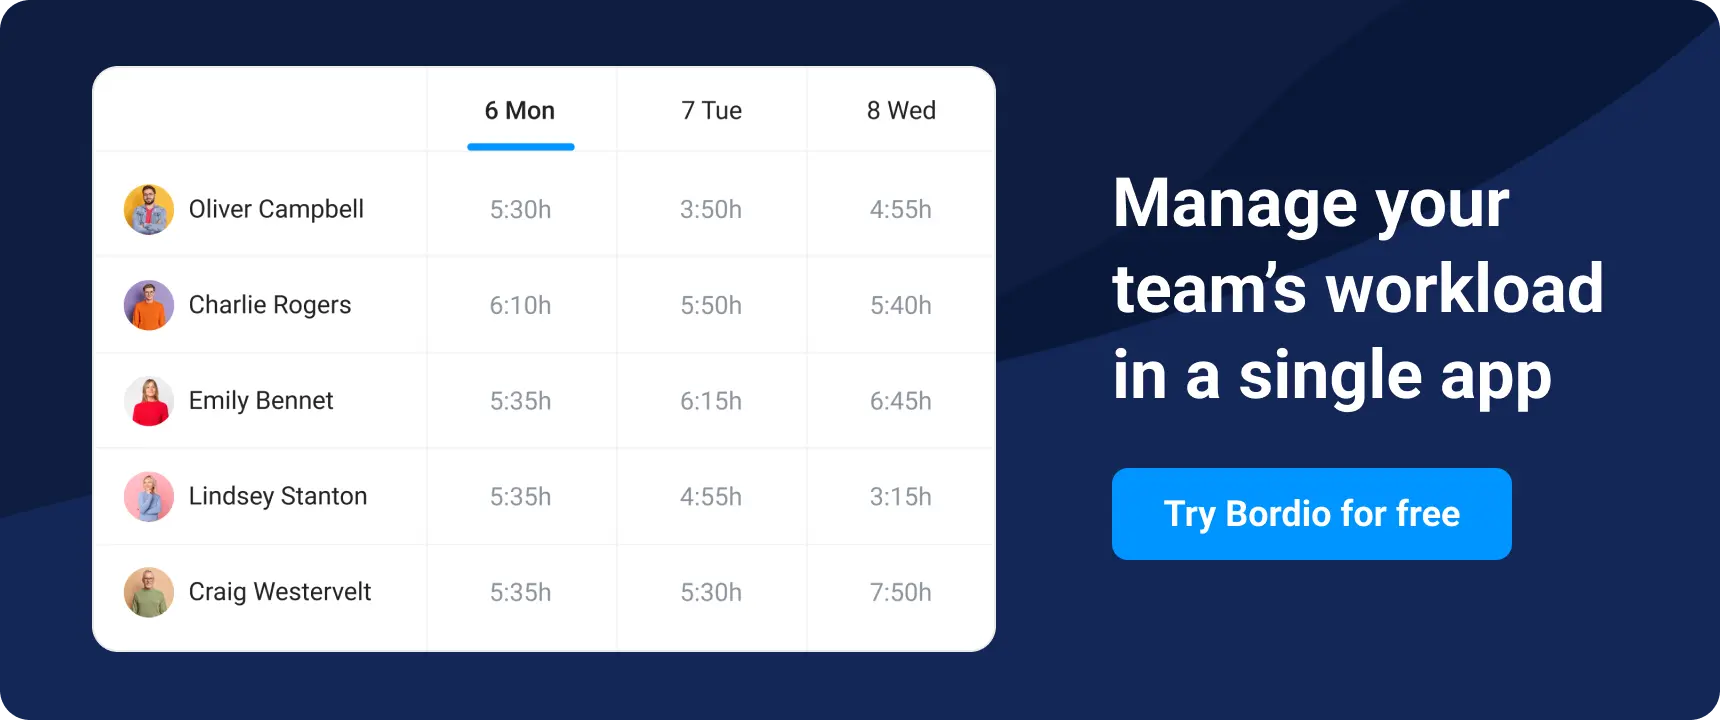 Manage your team's workload